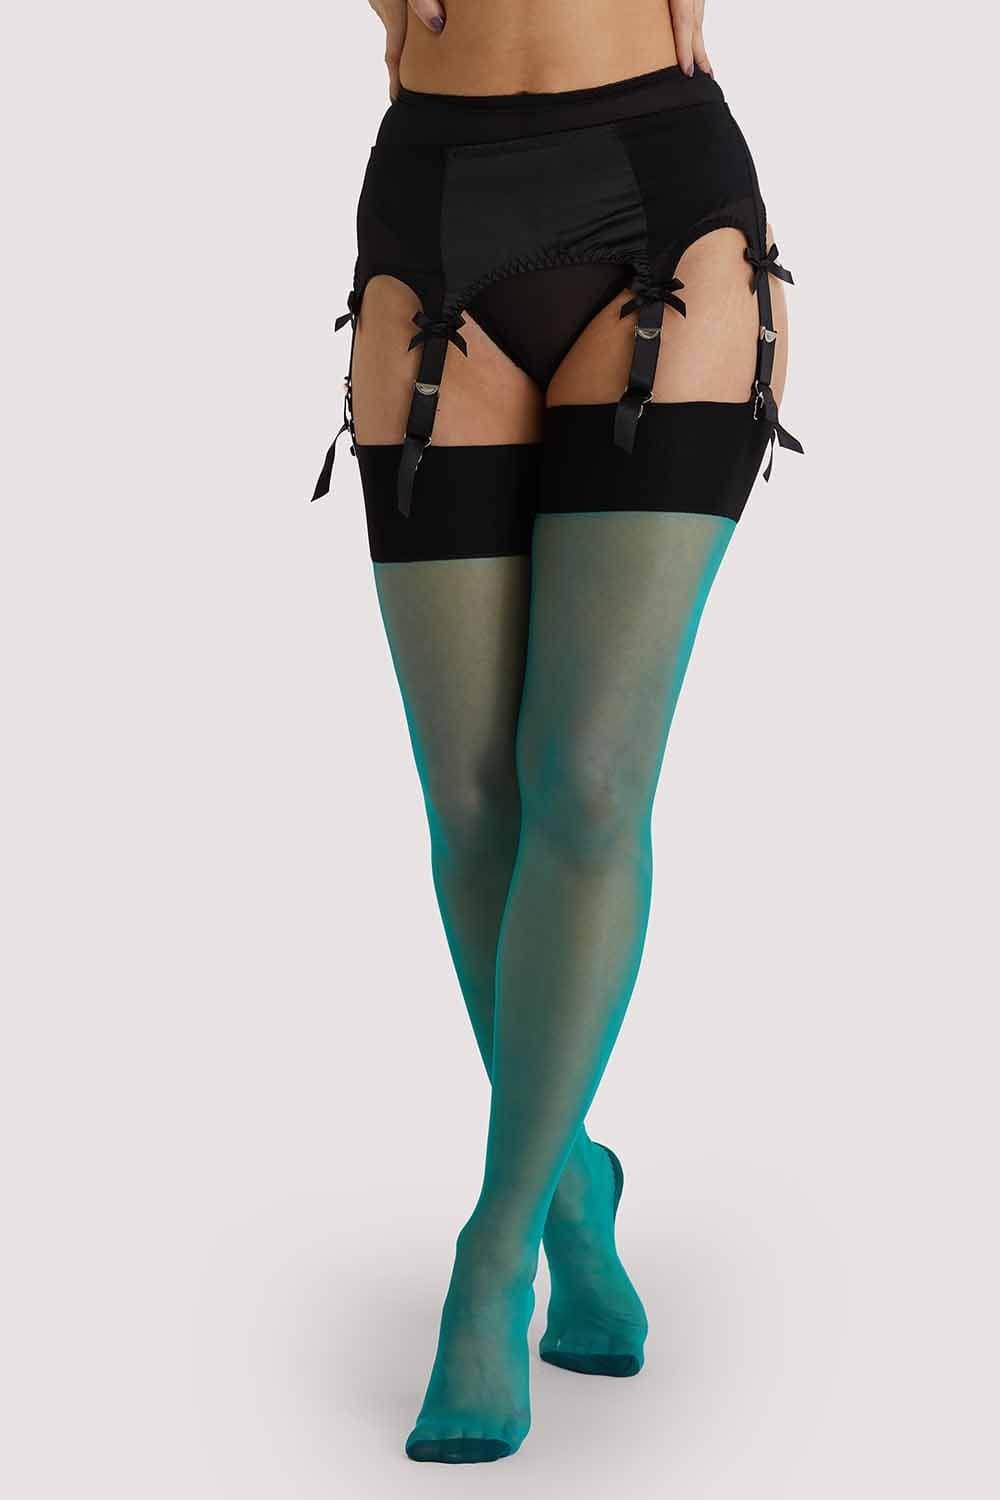 Bow Back Stockings Green